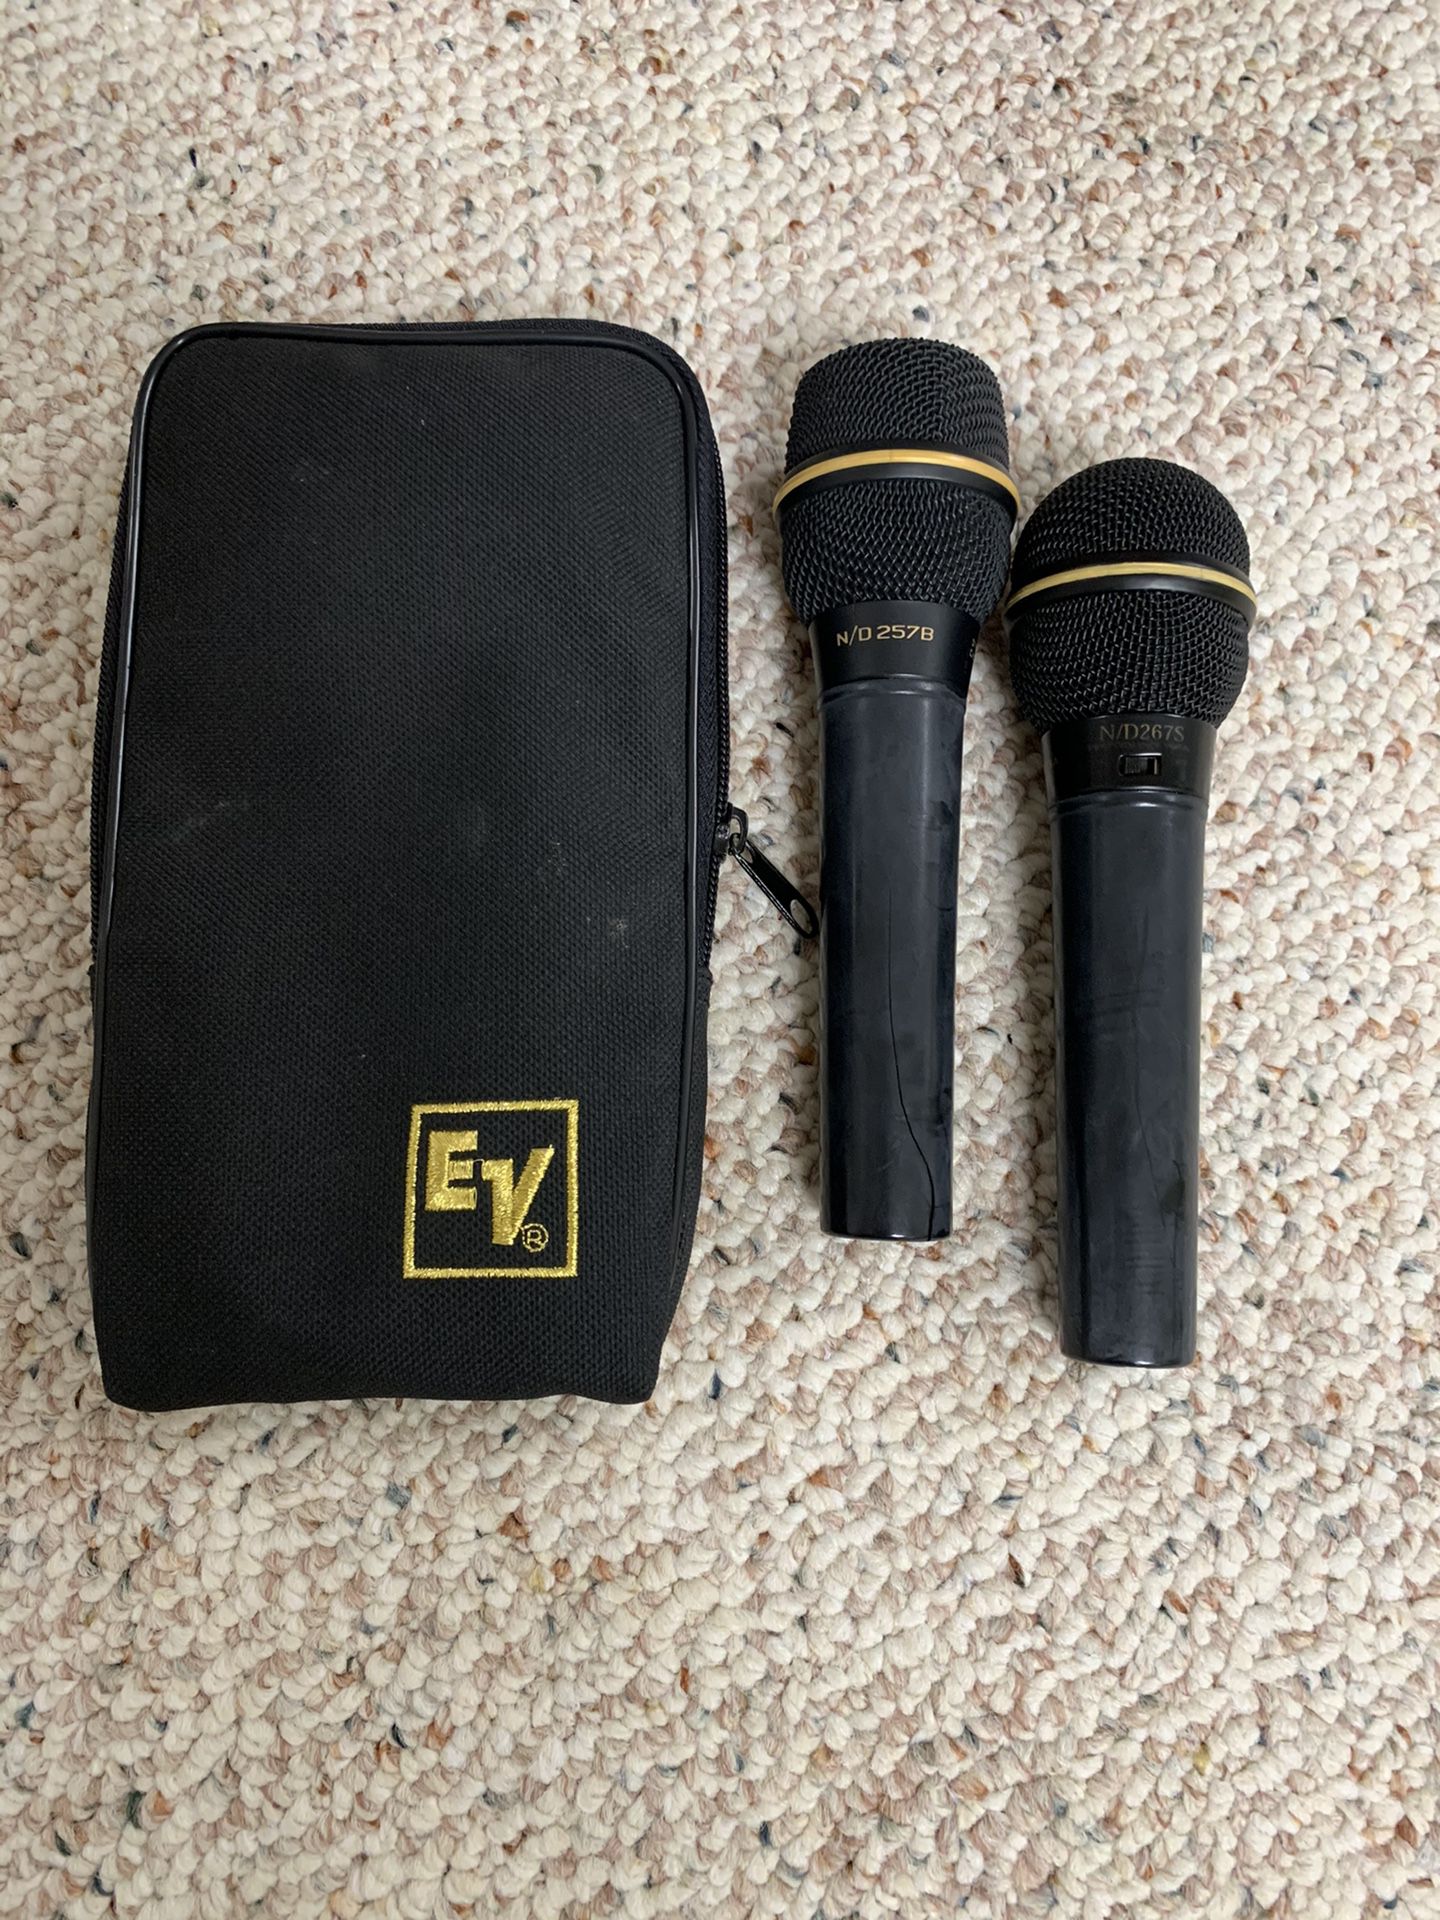 Two electro voice microphones.